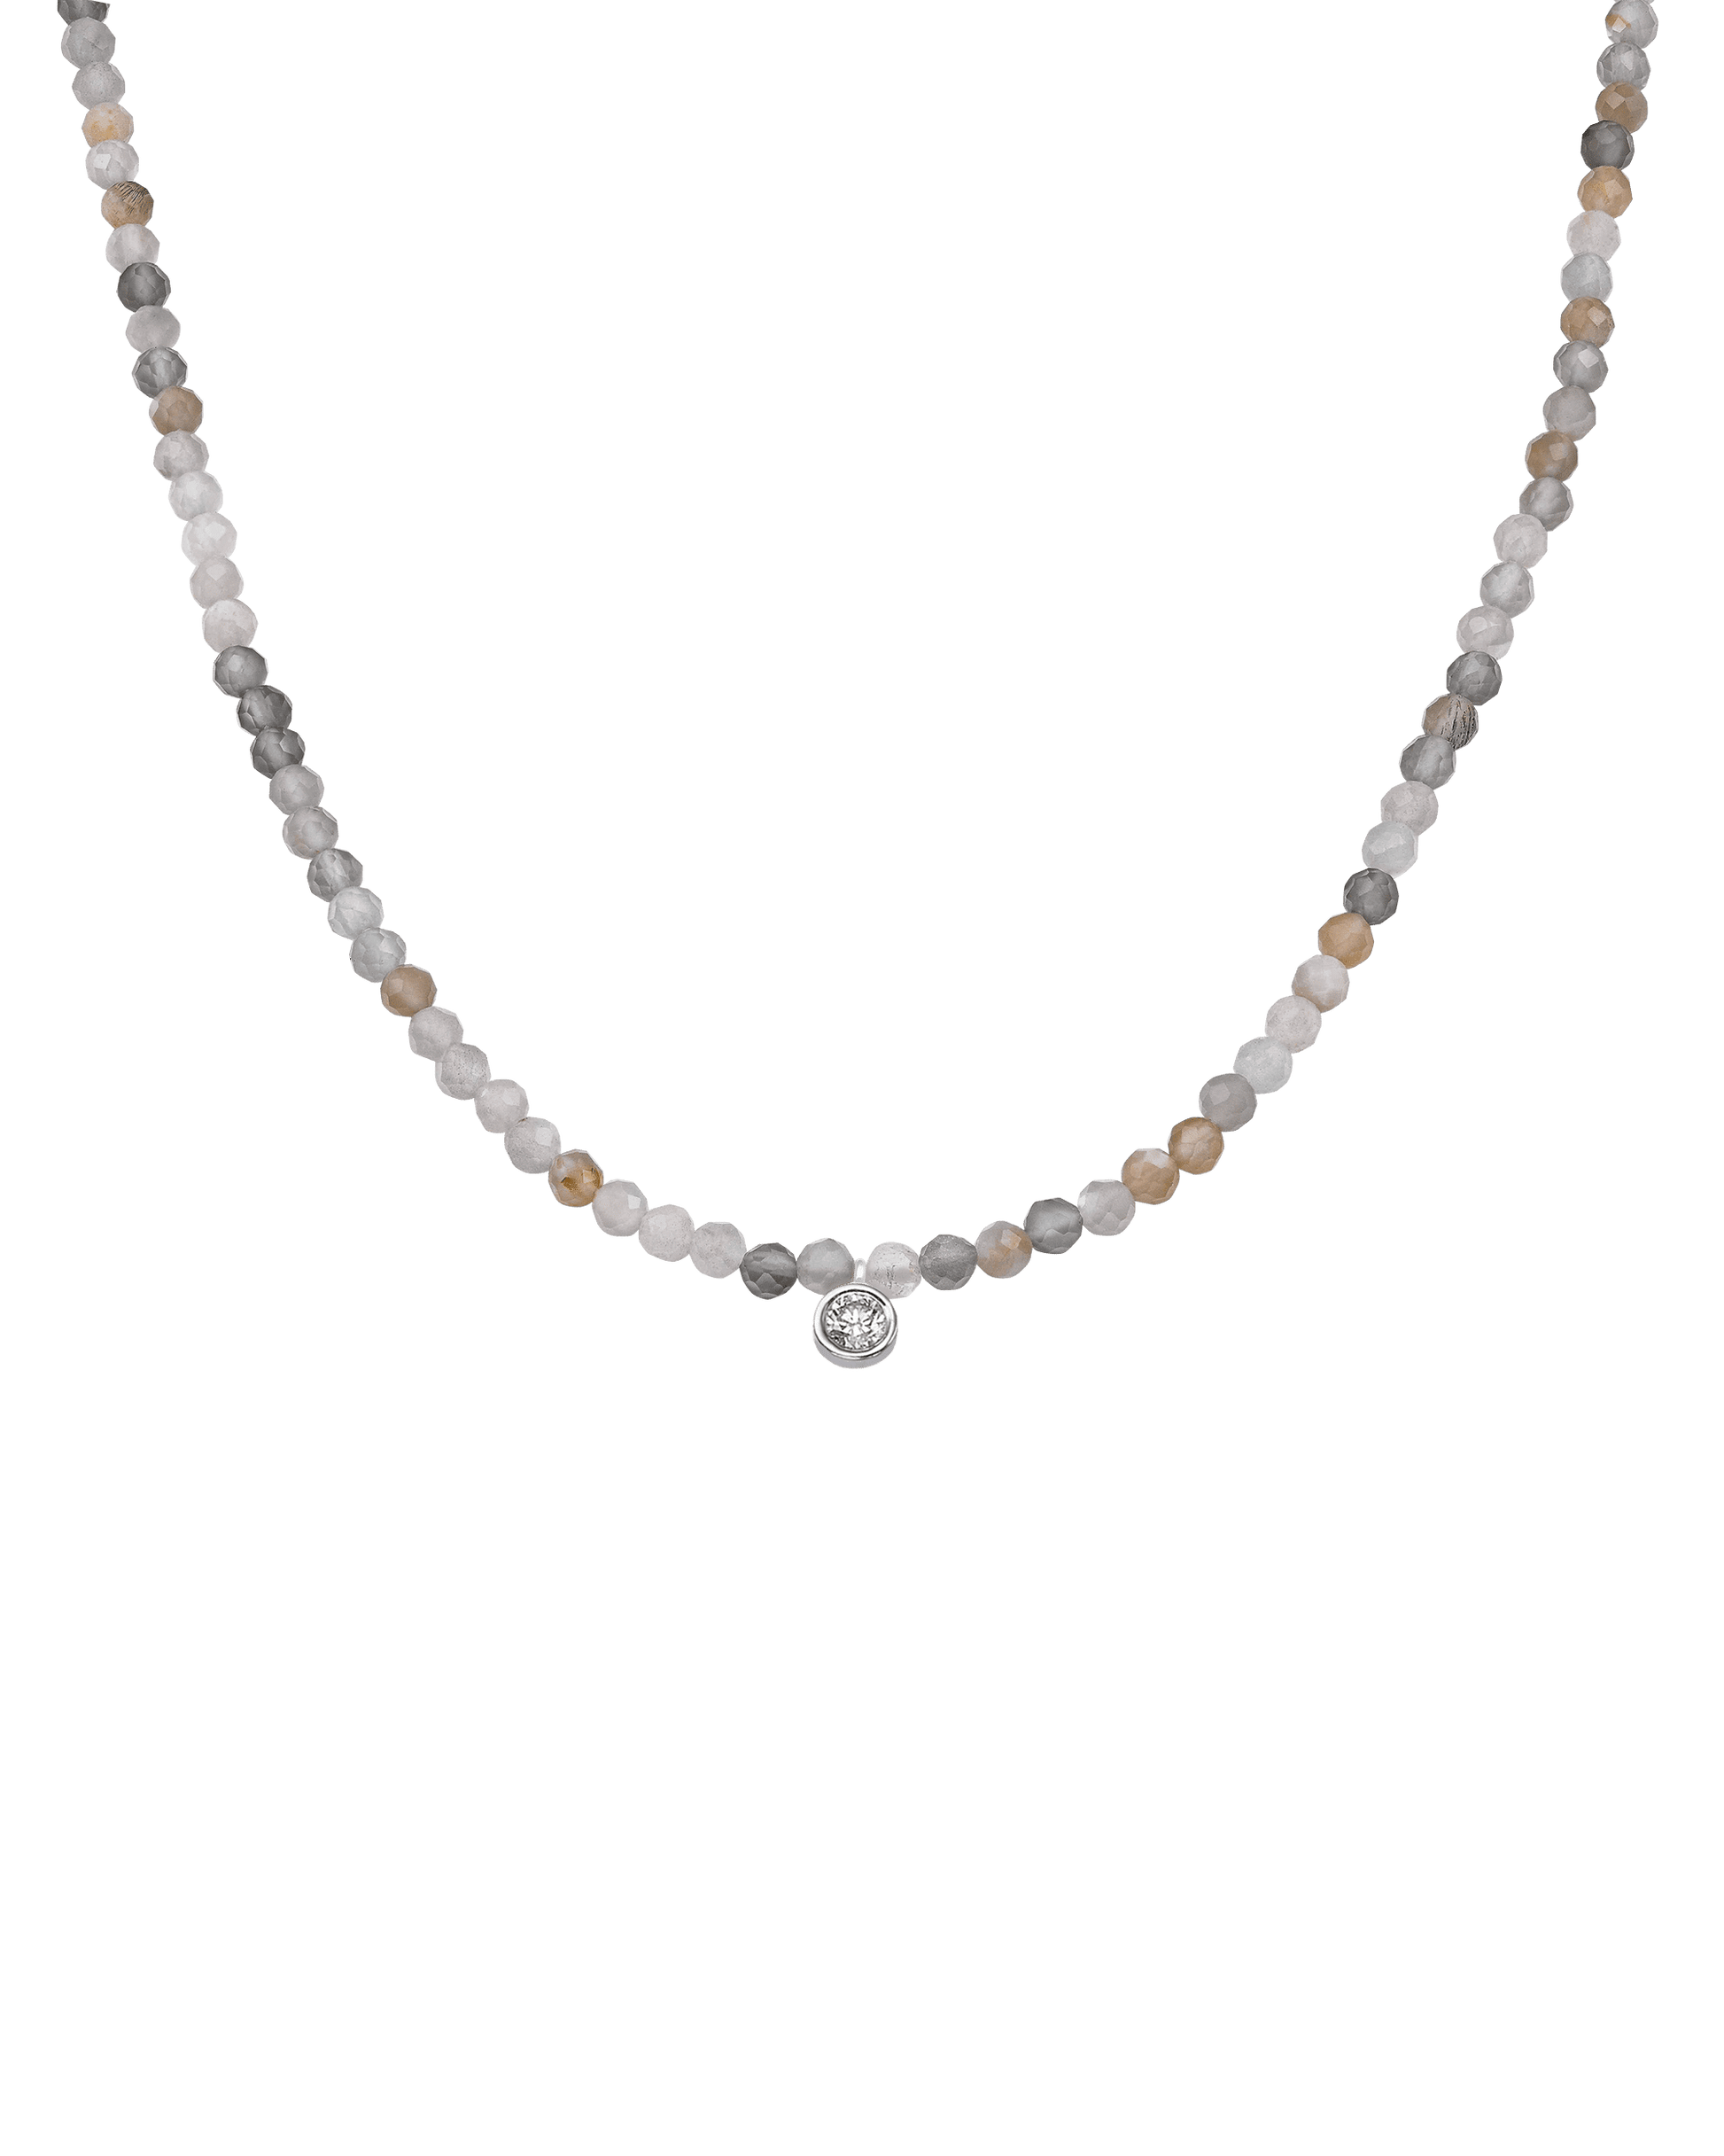 The Gemstone & Diamond Necklace - 14K White Gold Necklaces 14K Solid Gold Natural Moonstone Large: 0.1ct 14"